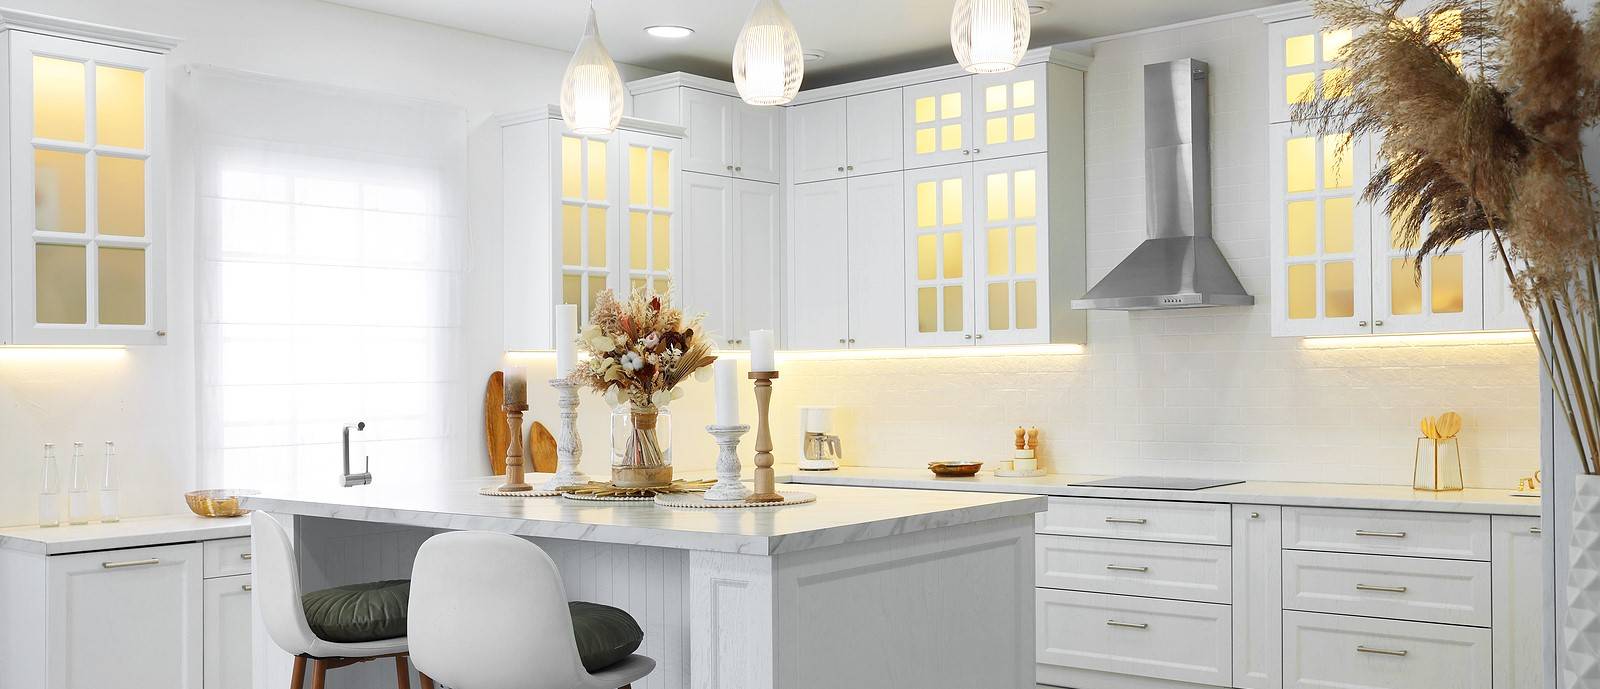 Tips for a Kitchen Renovation in a Rental Property